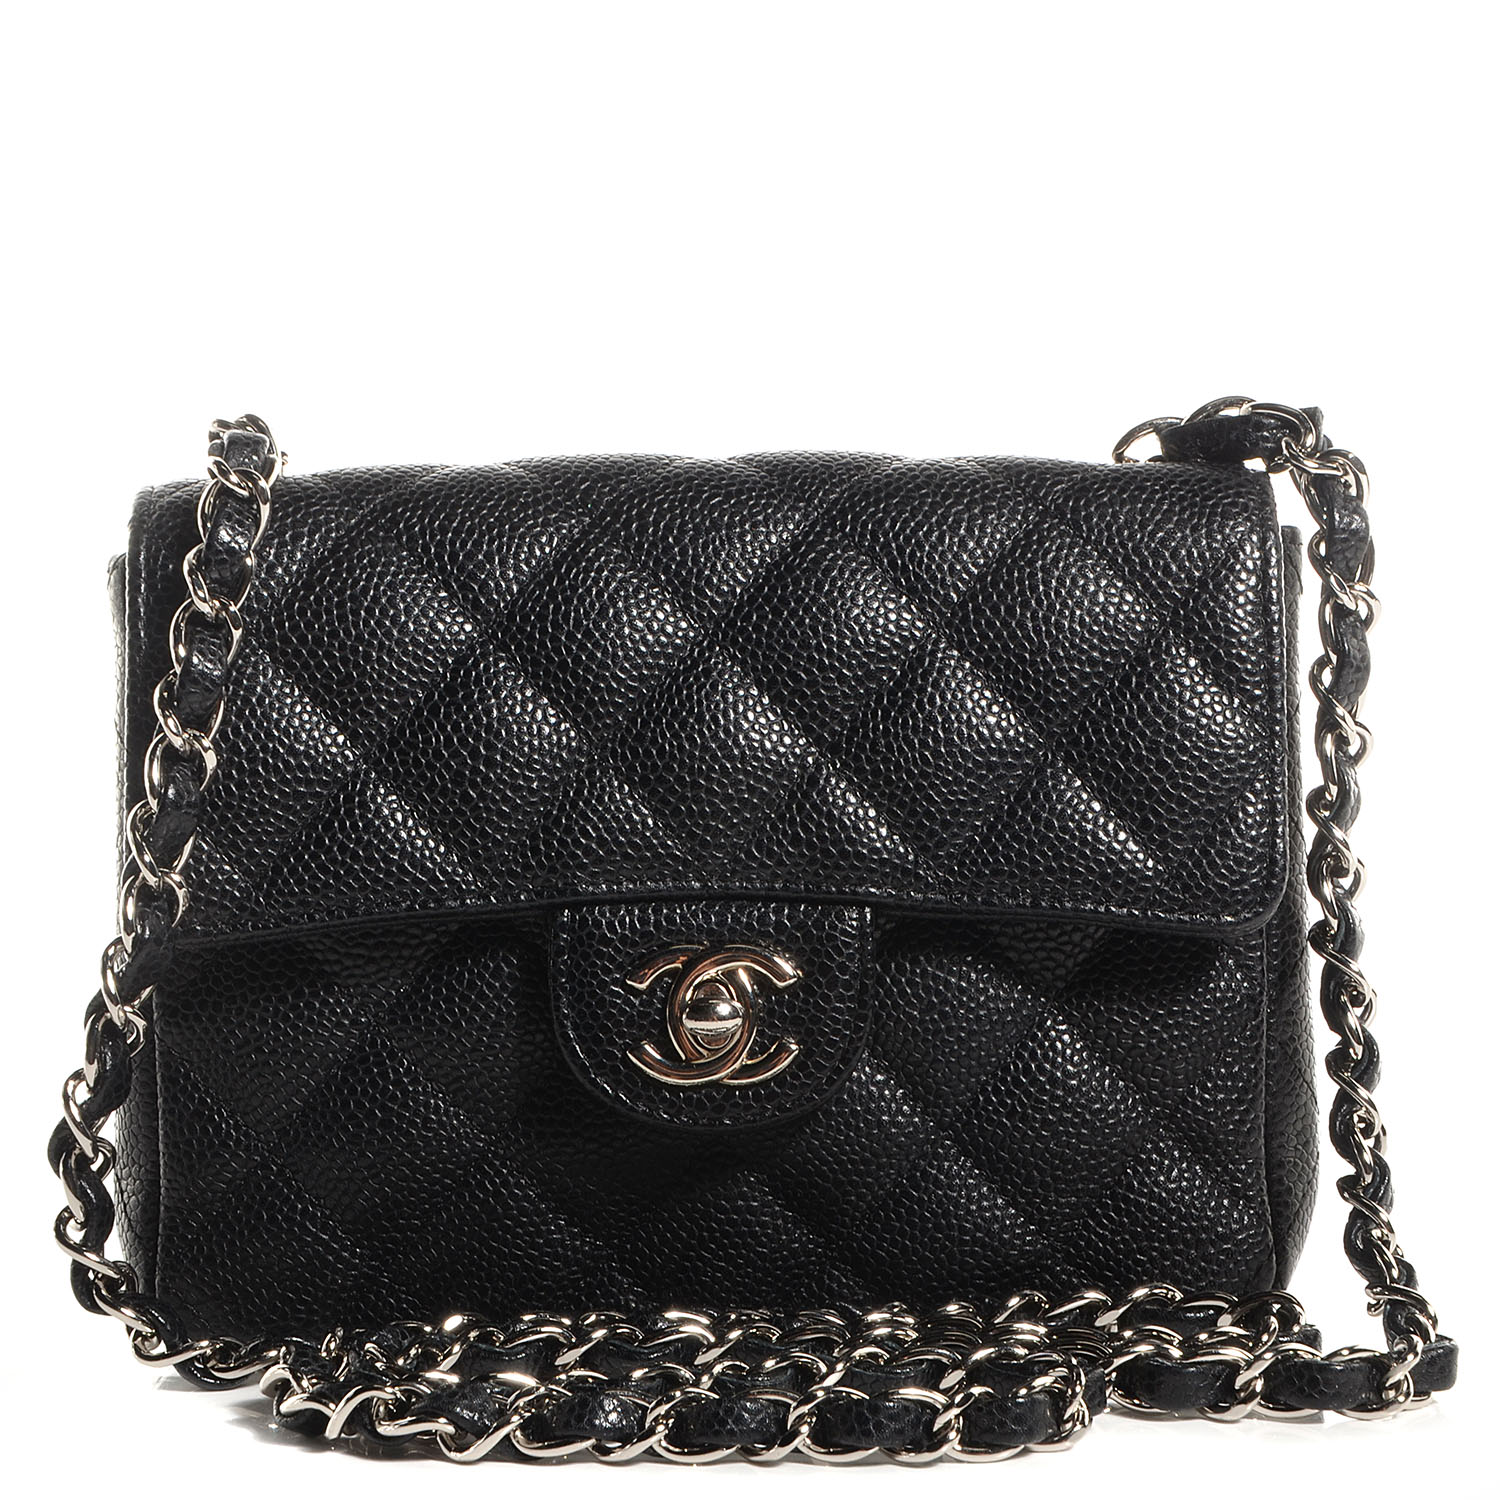 CHANEL Caviar Quilted Mini Square Flap Bag Black 81823